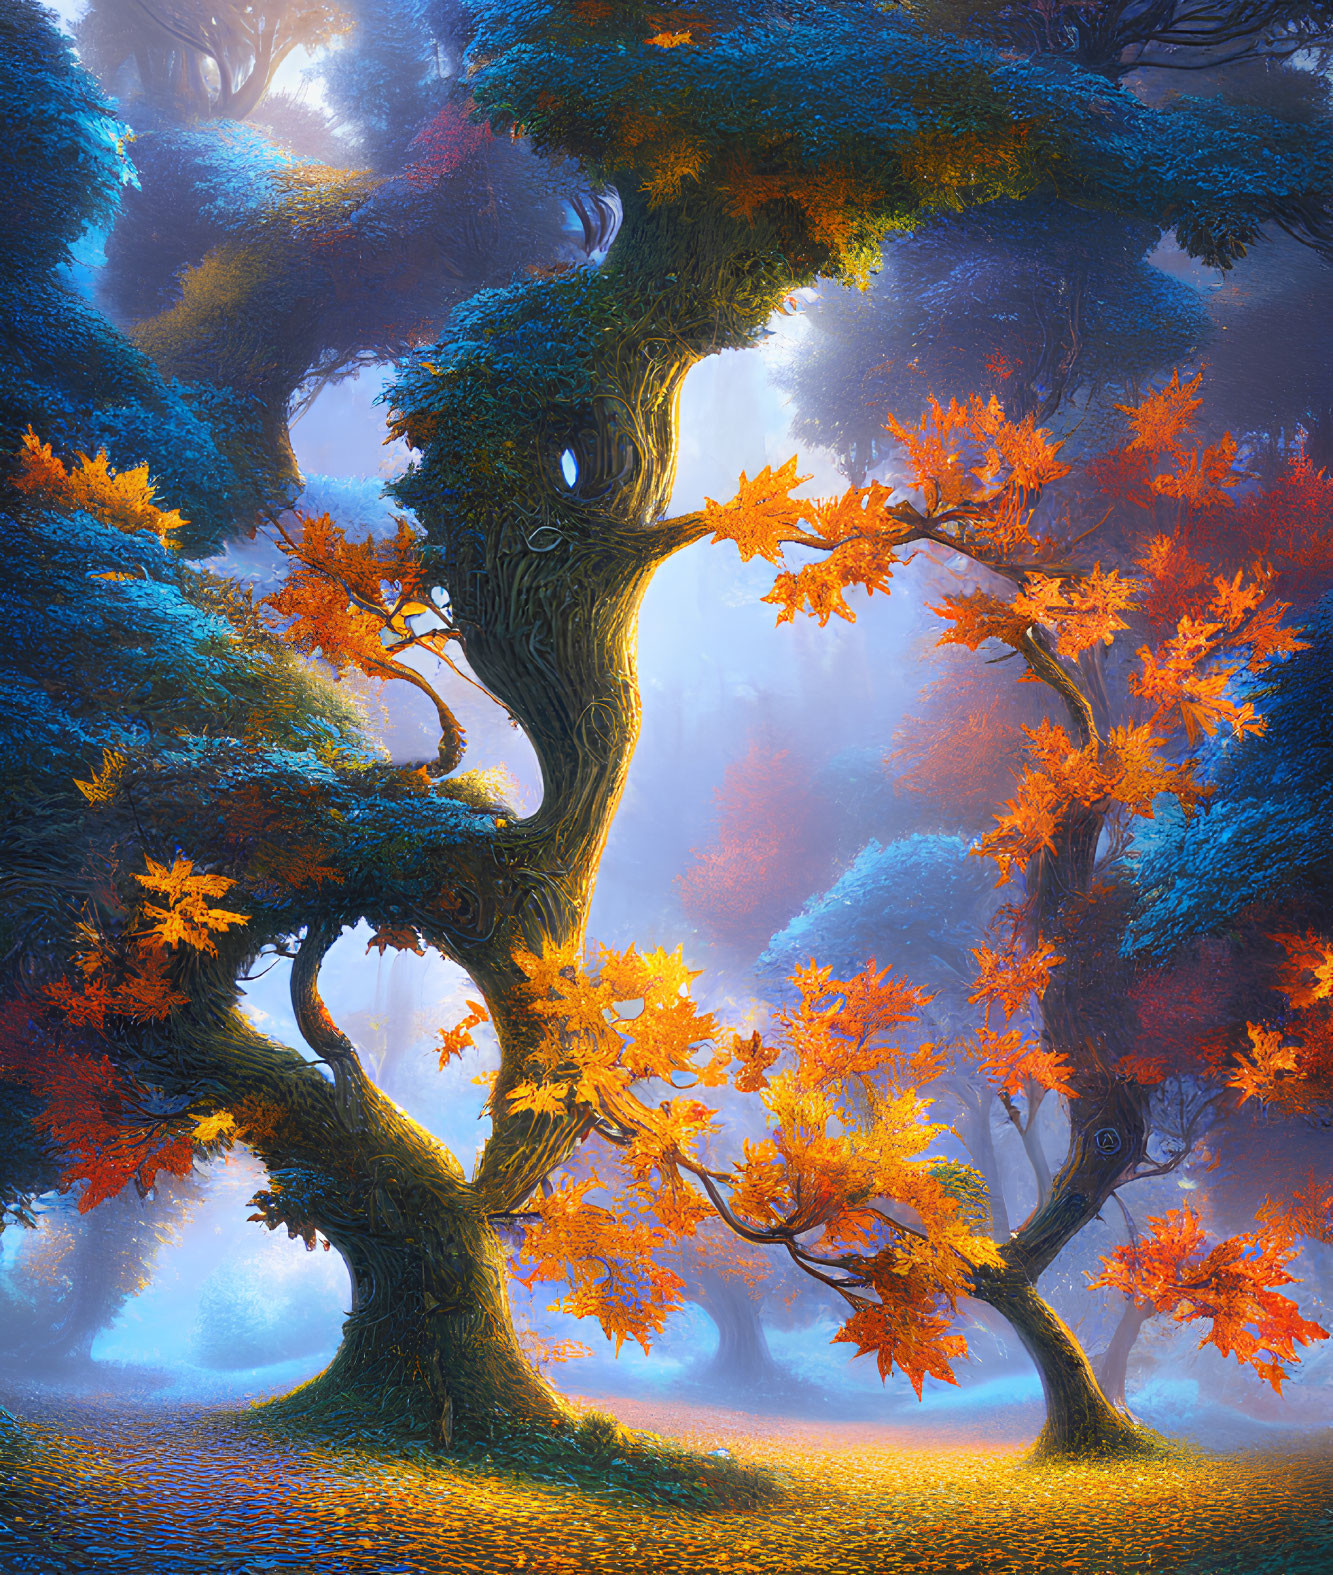 Mystical forest with twisted trees and vibrant orange leaves